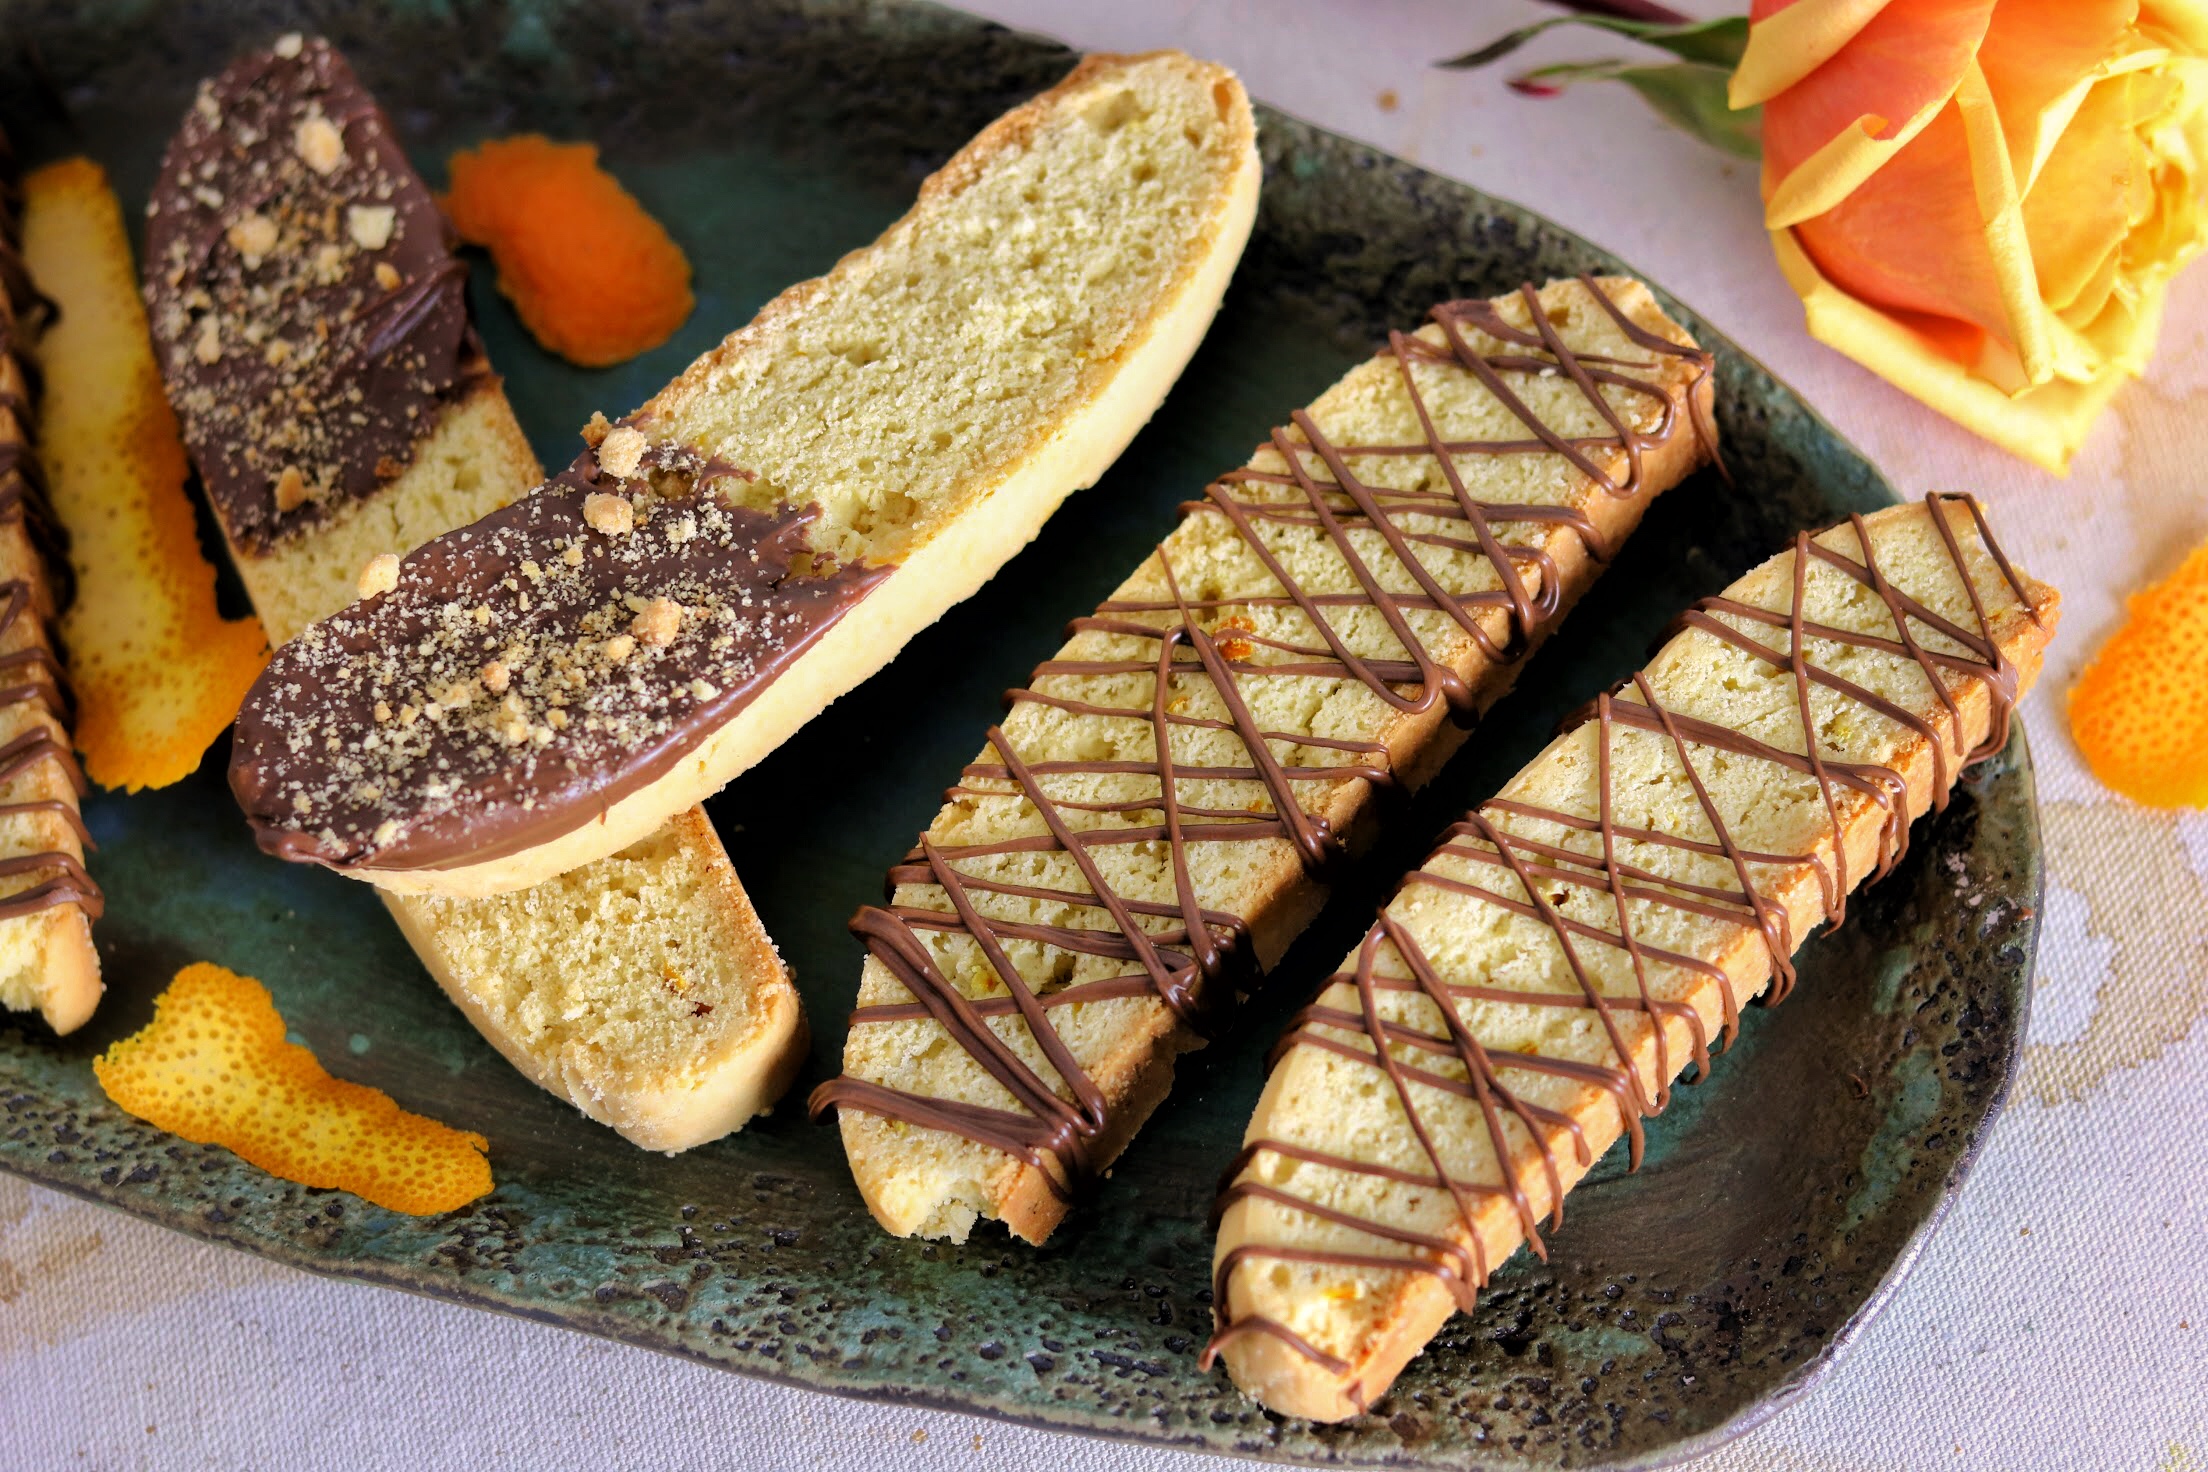 A Mother’s Day Treat: Citrus Rose Biscotti with Orange Nutella Drizzle